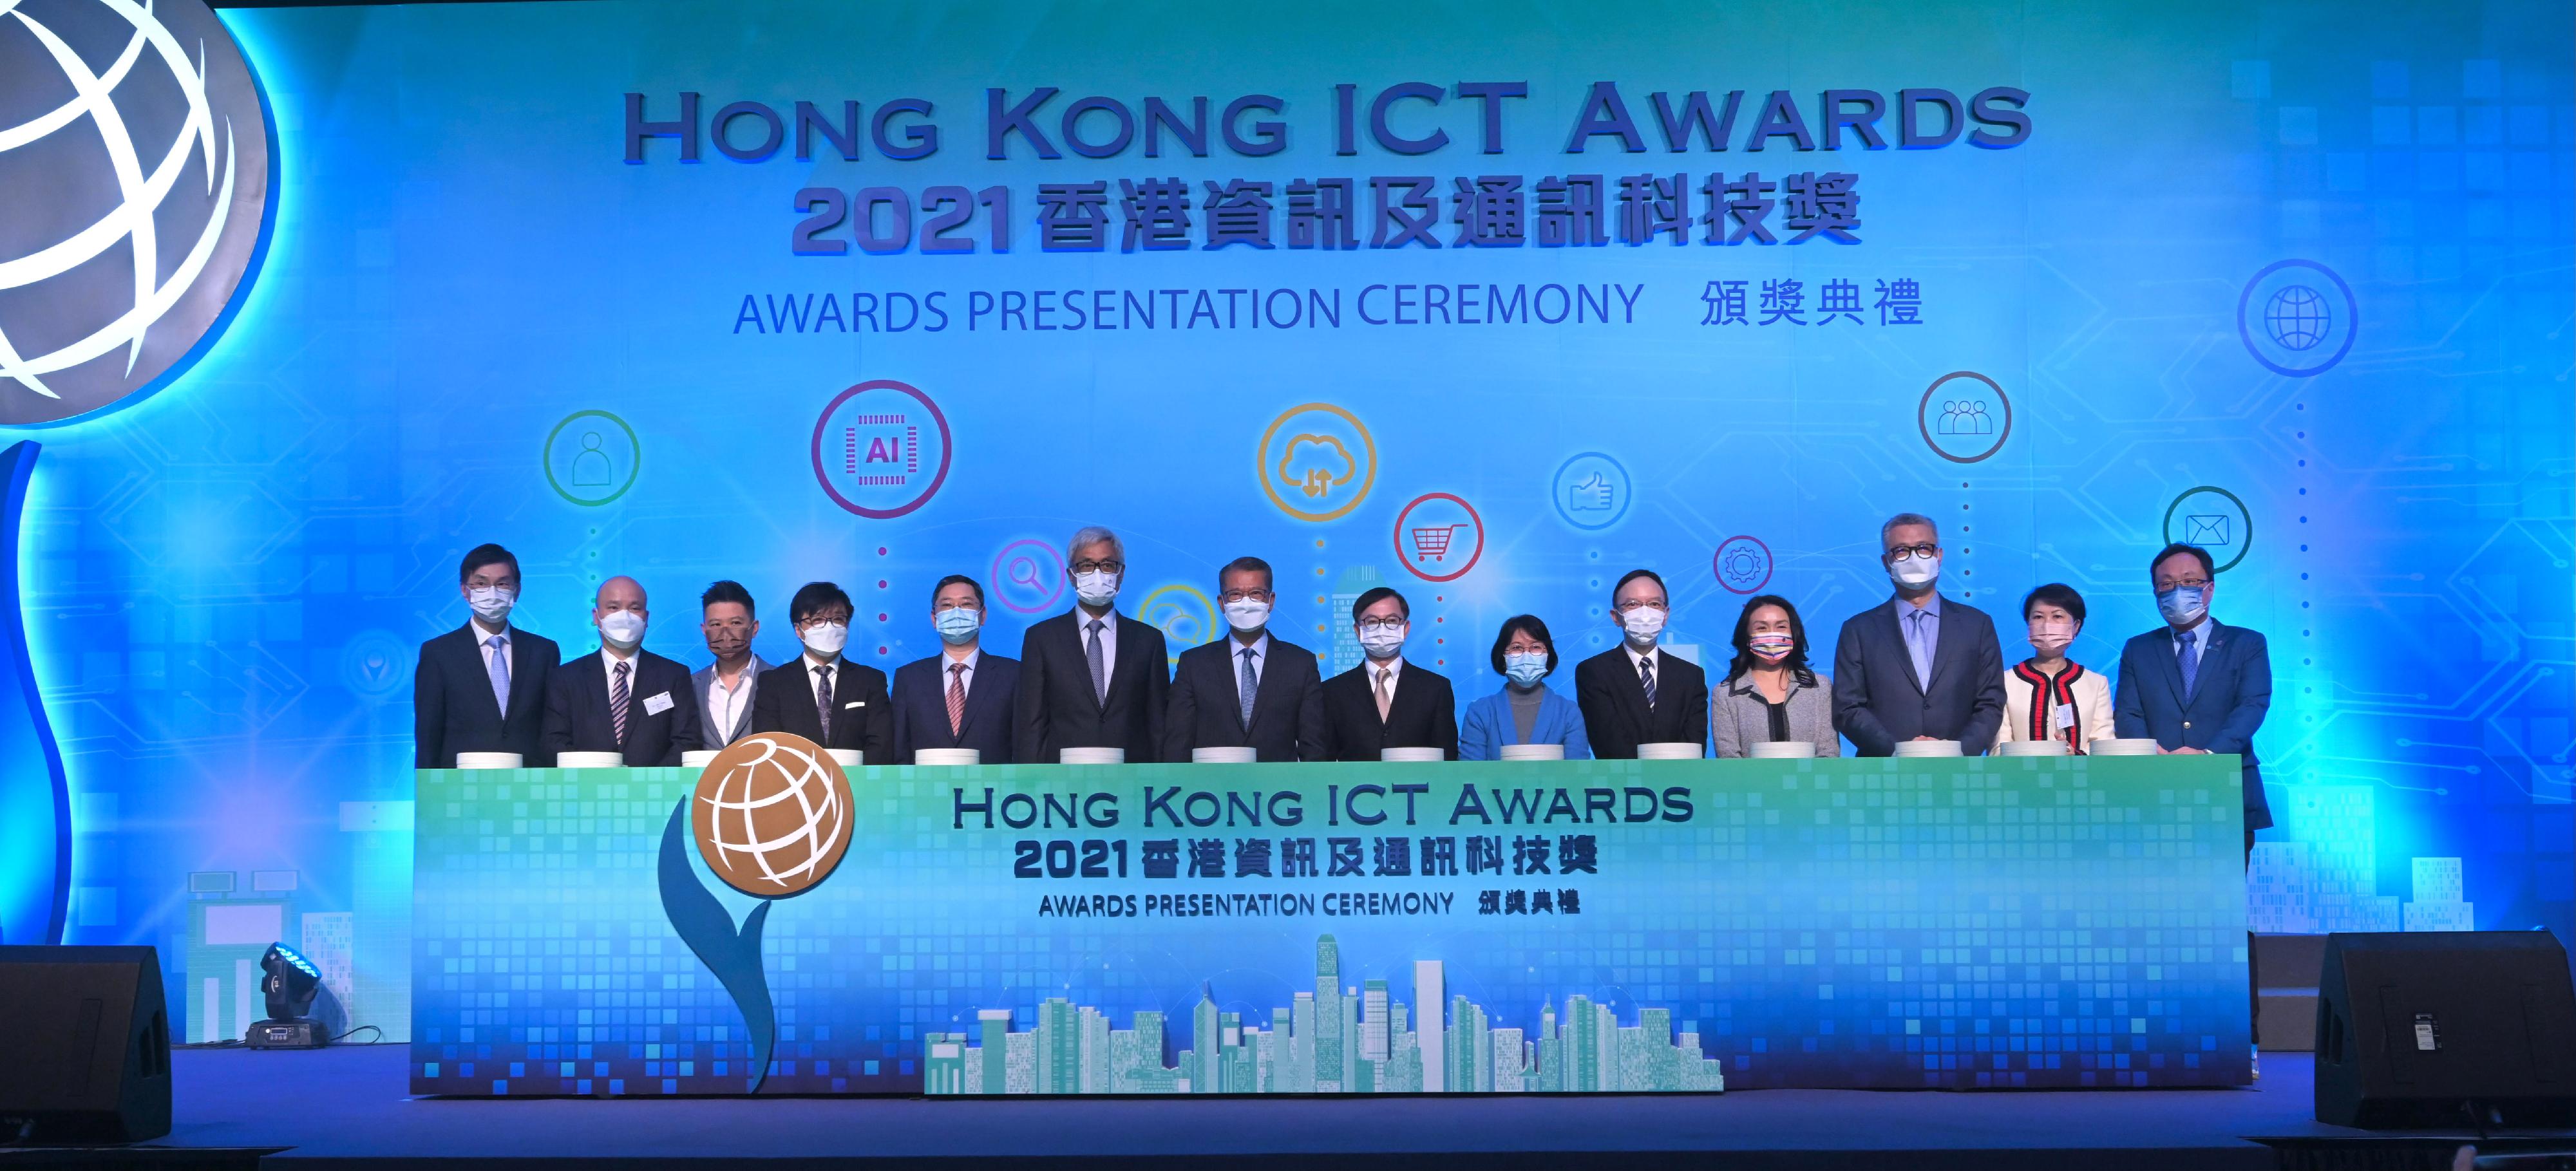 The Financial Secretary, Mr Paul Chan, attended the Hong Kong ICT Awards 2021 Awards Presentation Ceremony this evening (November 29). Photo shows (from fifth left) the Deputy Director-General of the Department of Youth Affairs of the Liaison Office of the Central People’s Government in the Hong Kong Special Administrative Region, Mr Song Lai; the Chairman of the Hong Kong ICT Awards 2021 Grand Judging Panel, Professor Wei Shyy; Mr Chan; the Acting Secretary for Innovation and Technology, Dr David Chung; the Permanent Secretary for Innovation and Technology, Ms Annie Choi; the Government Chief Information Officer, Mr Victor Lam; and other guests at the ceremony.